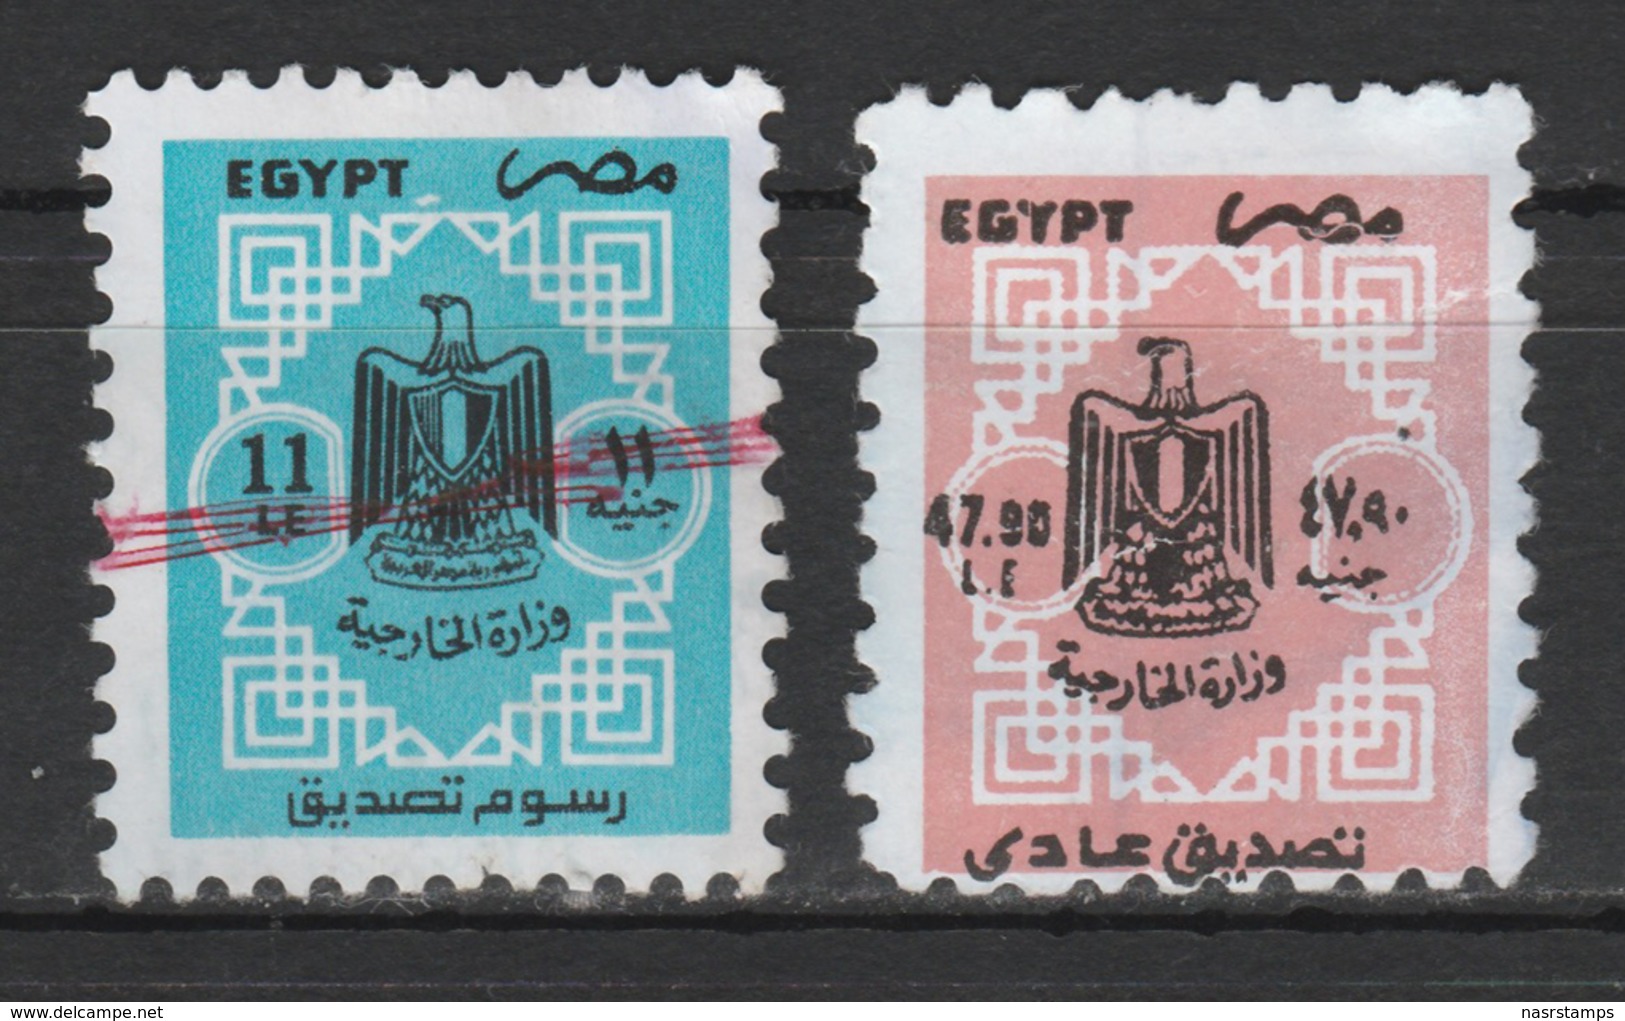 Egypt - Rare - ( Old Revenue - Ministry Of Foreign Affairs - 11 & 47.90 EGP ) Used - Gebruikt